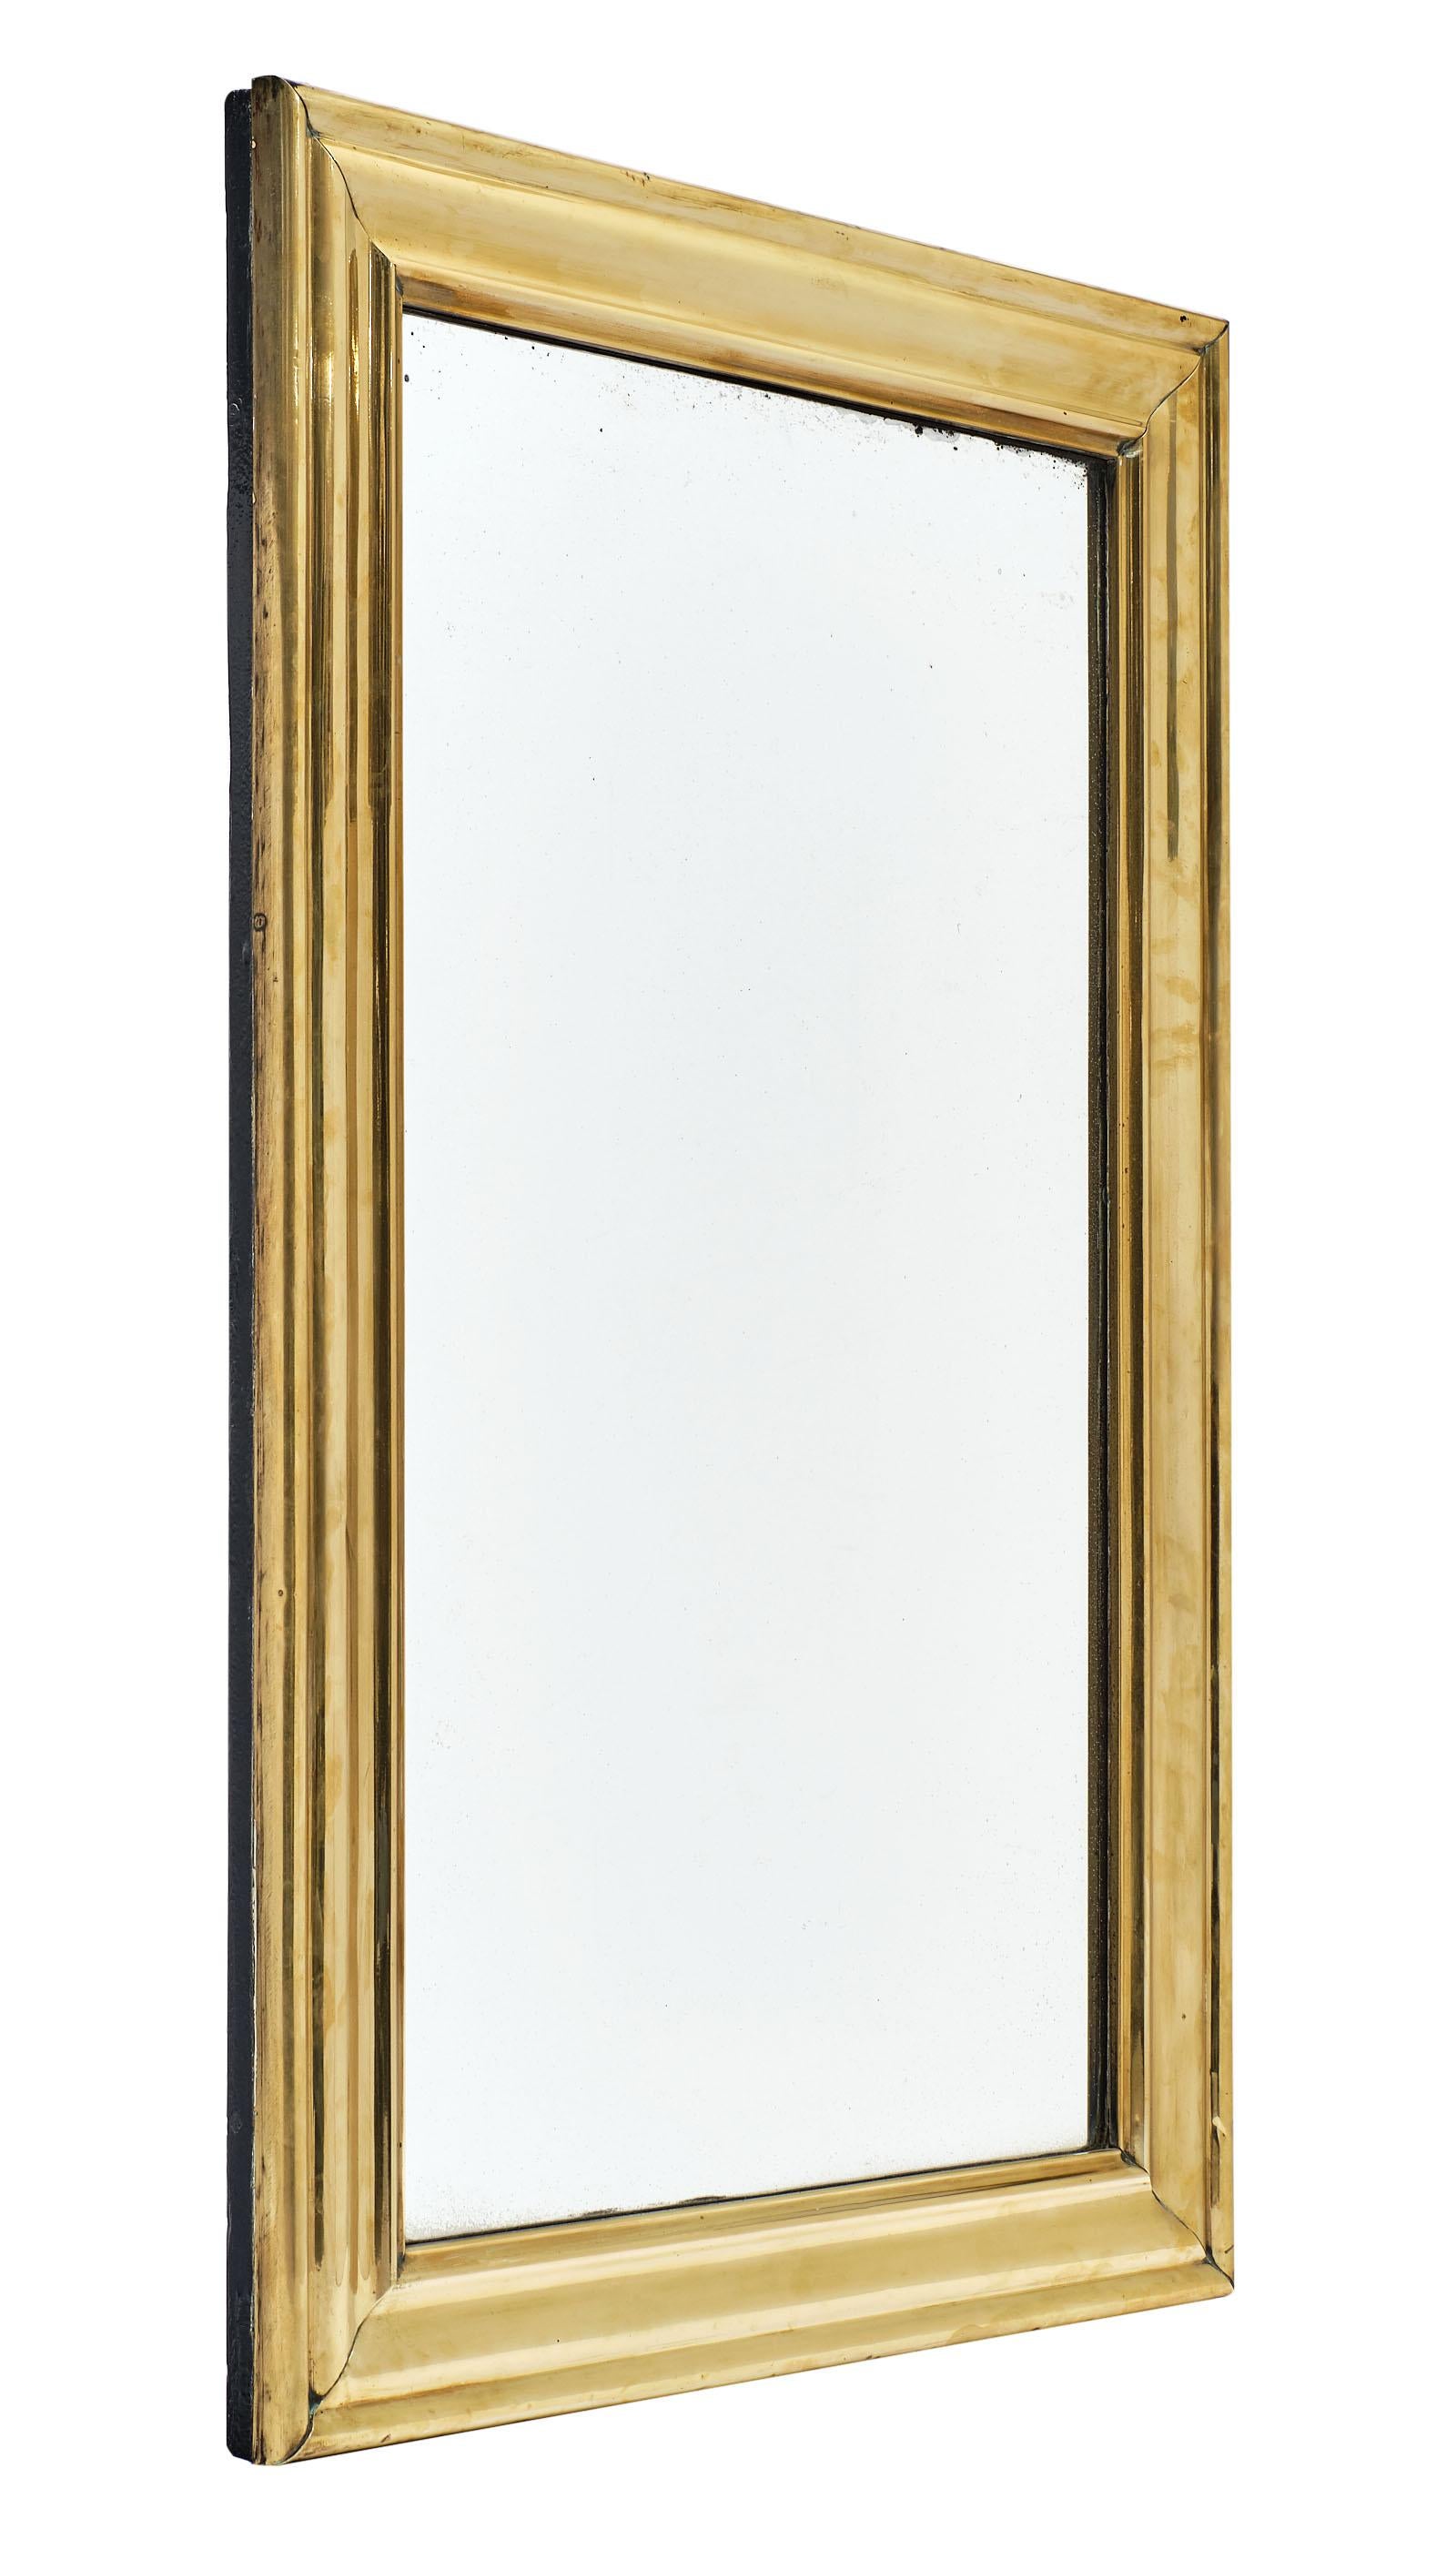 French Napoleon III gilt brass mirror with the original glass. We love the impressive size and style of this piece!